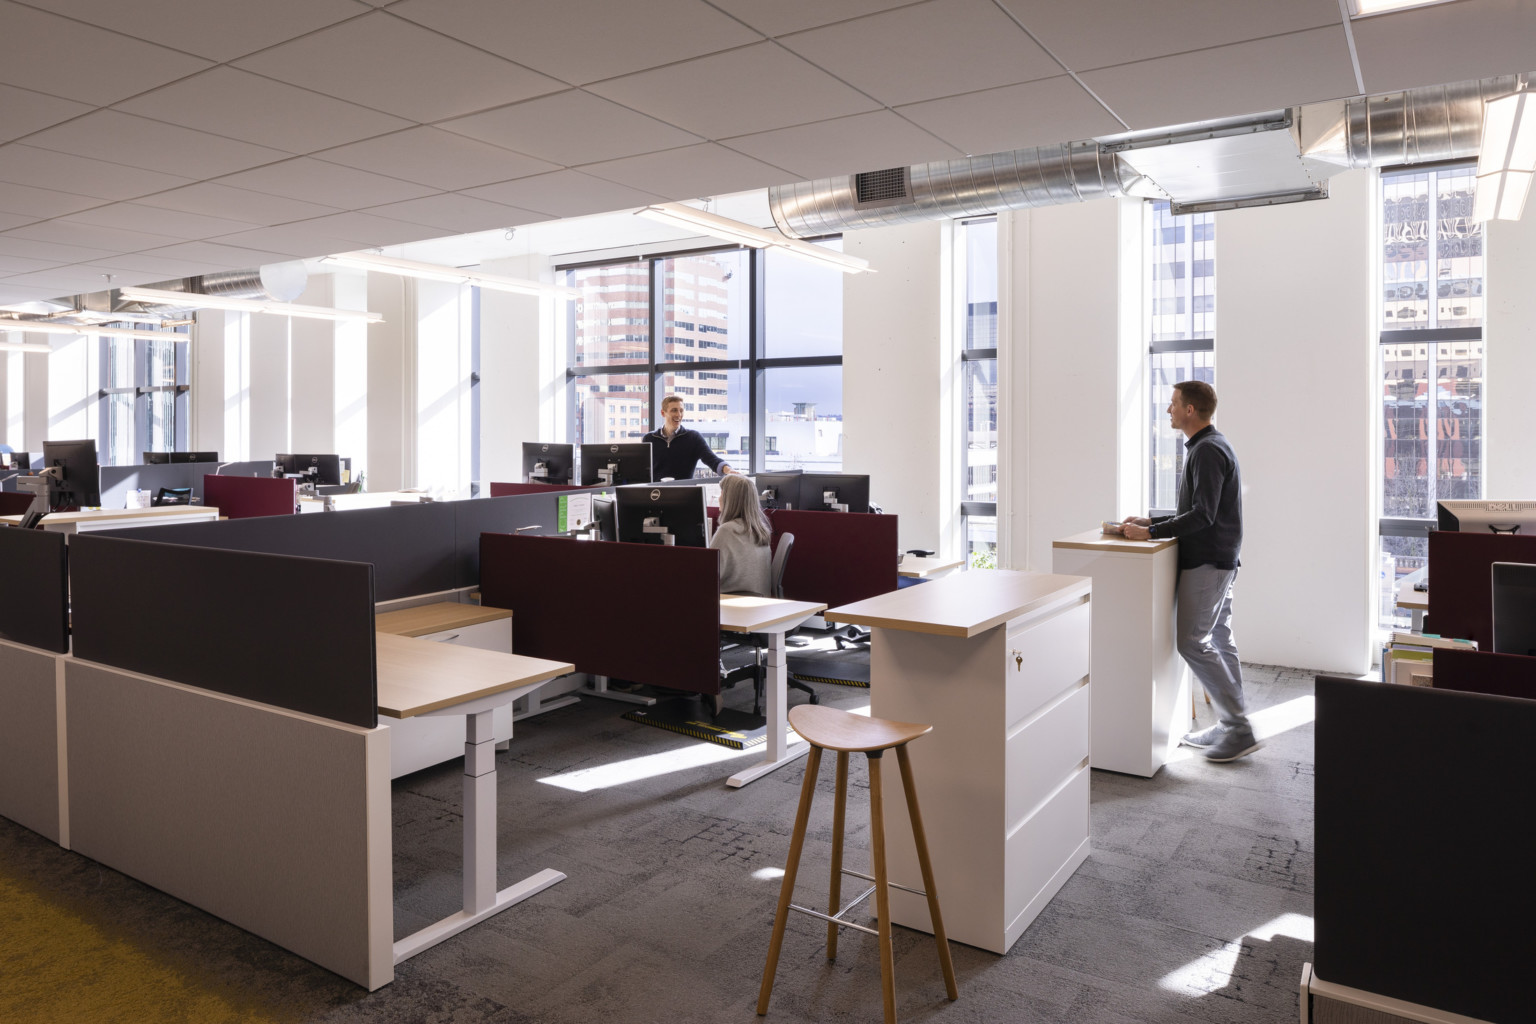 Flexible work stations in perimeter office allow employees to sit or stand as they work with natural light from large windows